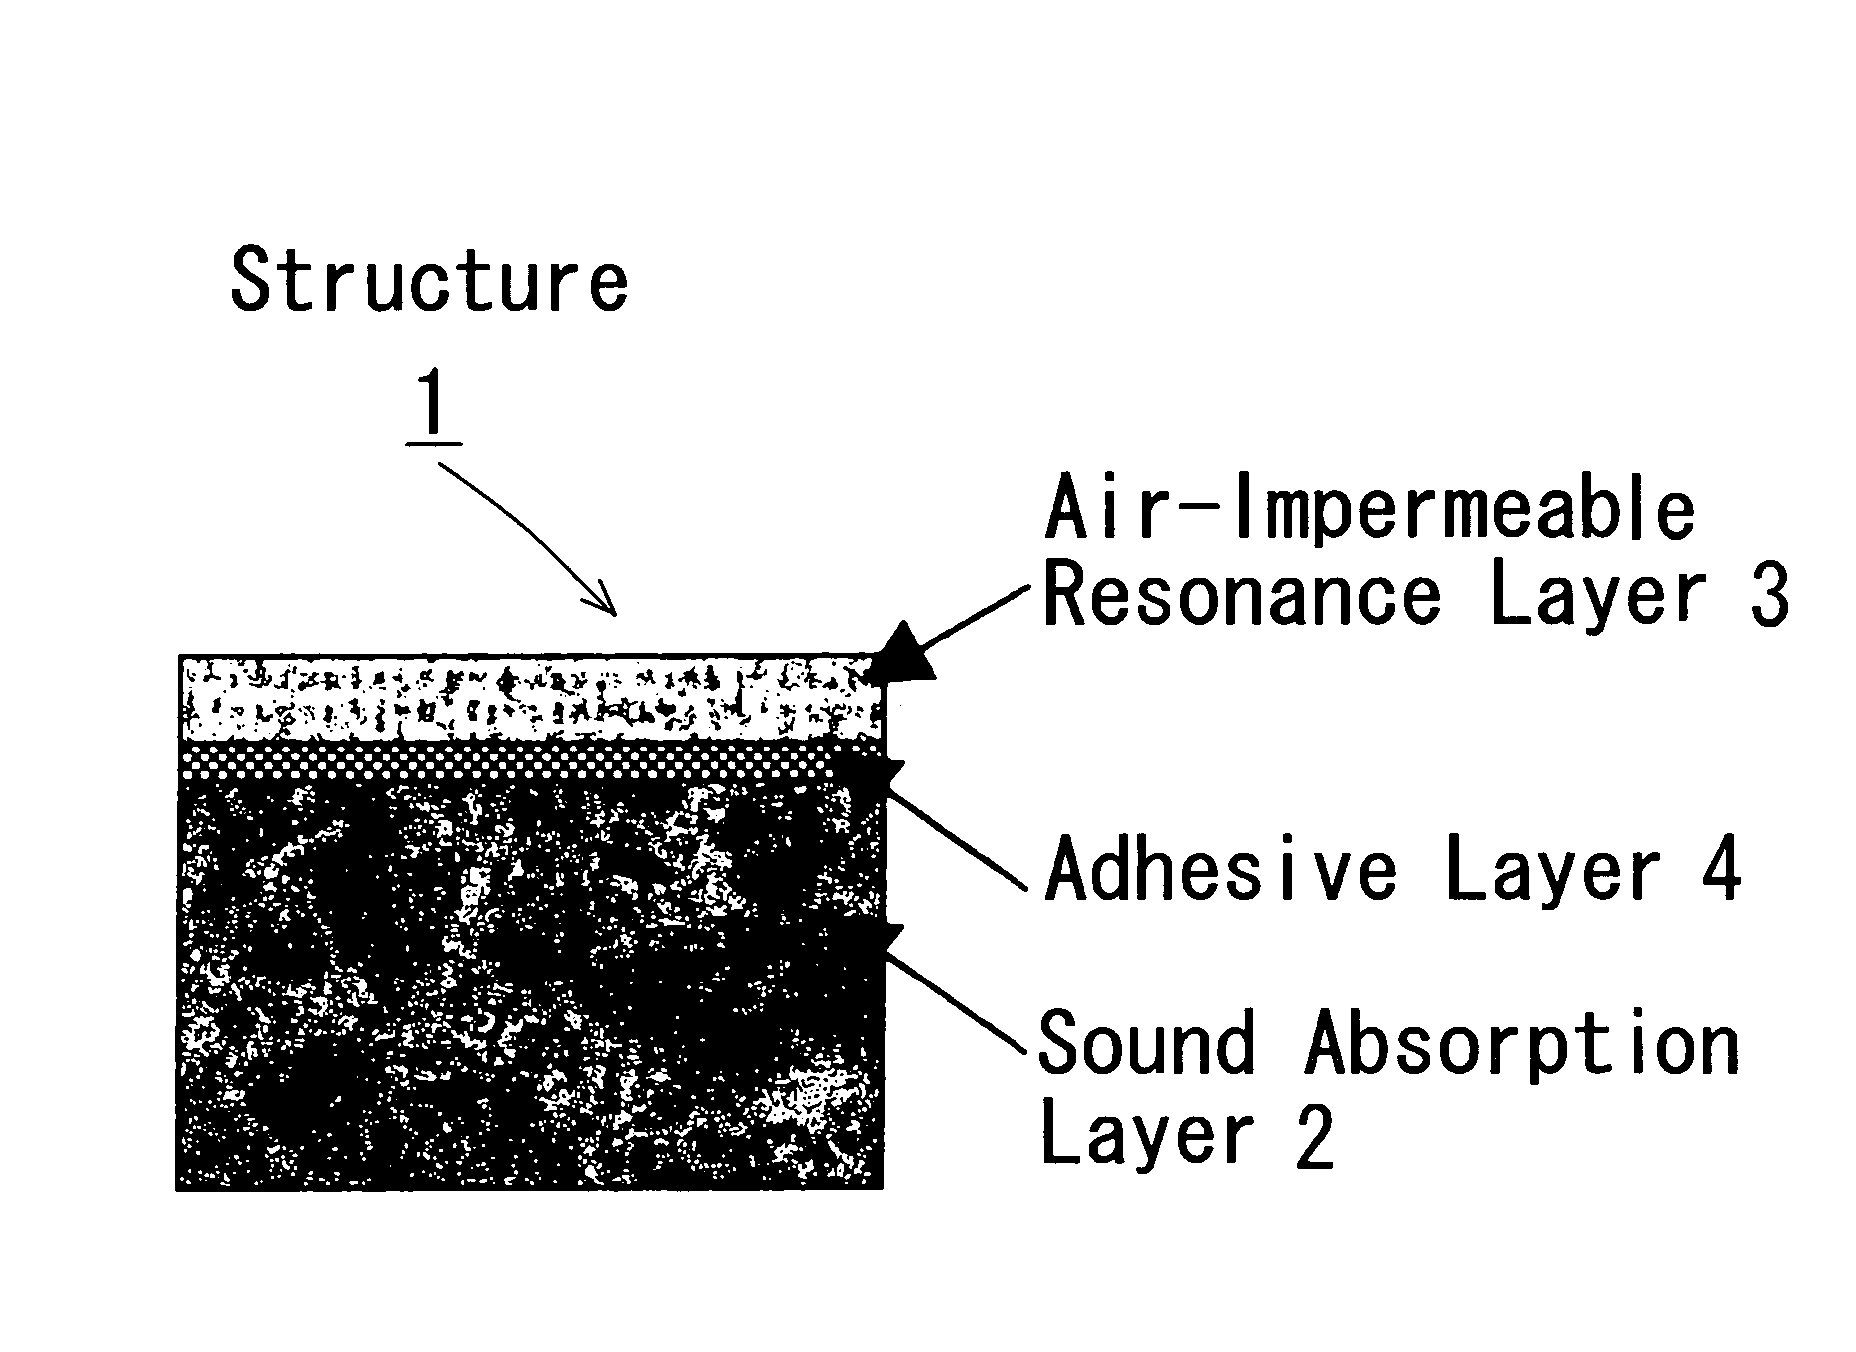 Ultralight soundproof material